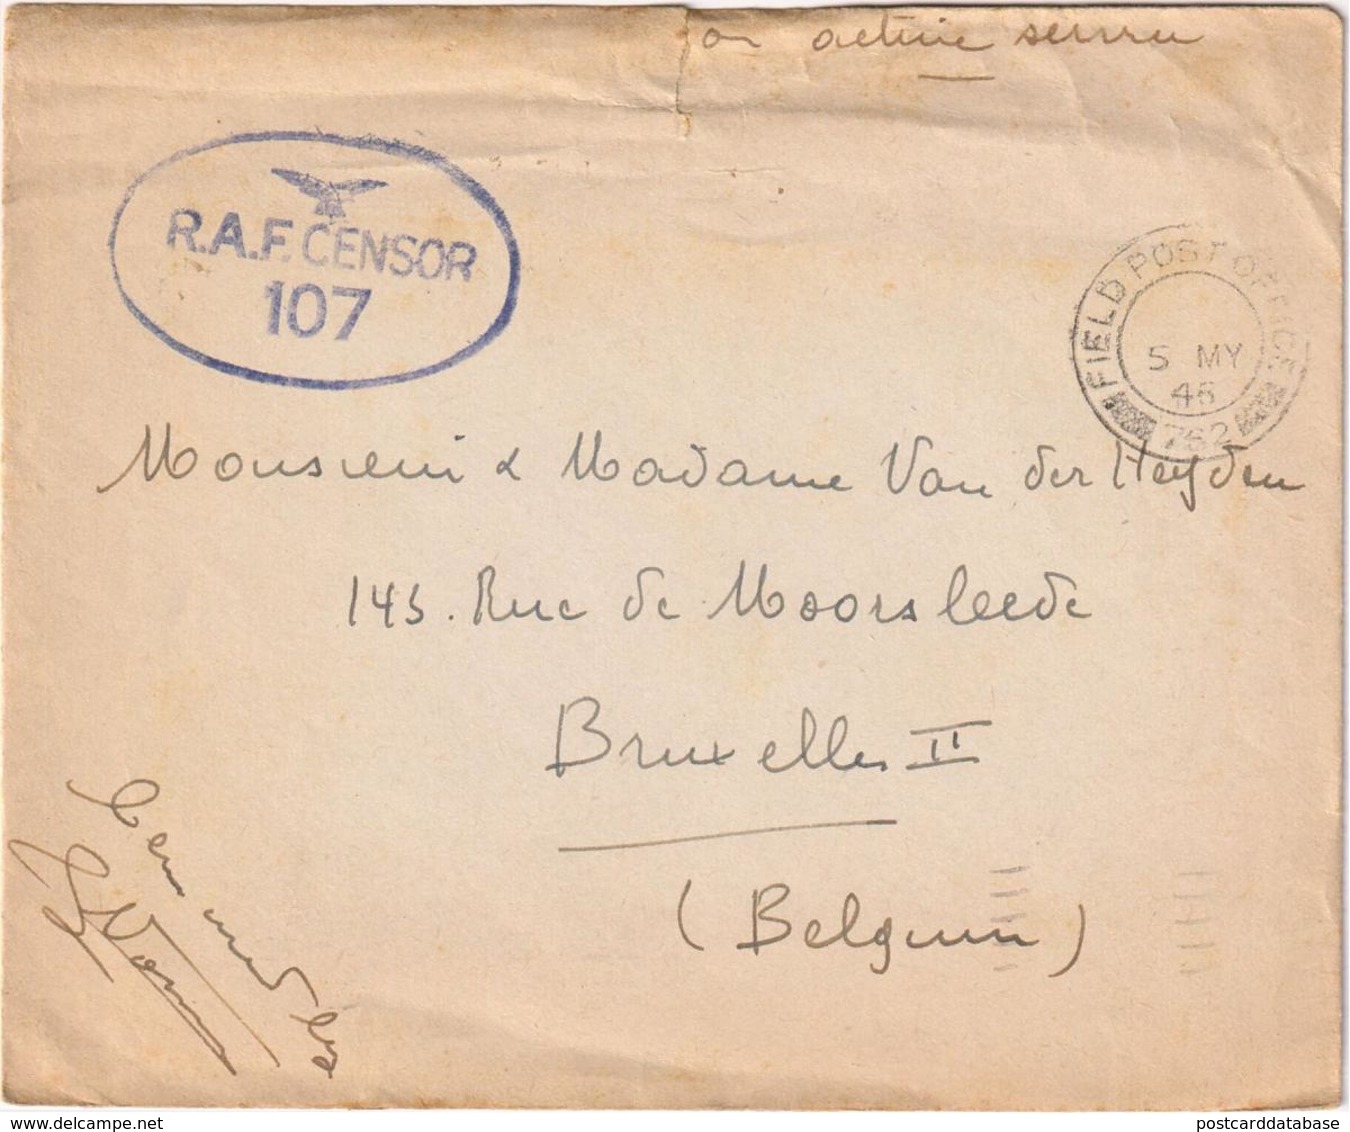 Field Post Office - R. A. F. Censor 107 -  Envelope Including Letter 1945 - P/O Vassin 191435 164 Squad 125W RAF BLA - O - Other & Unclassified